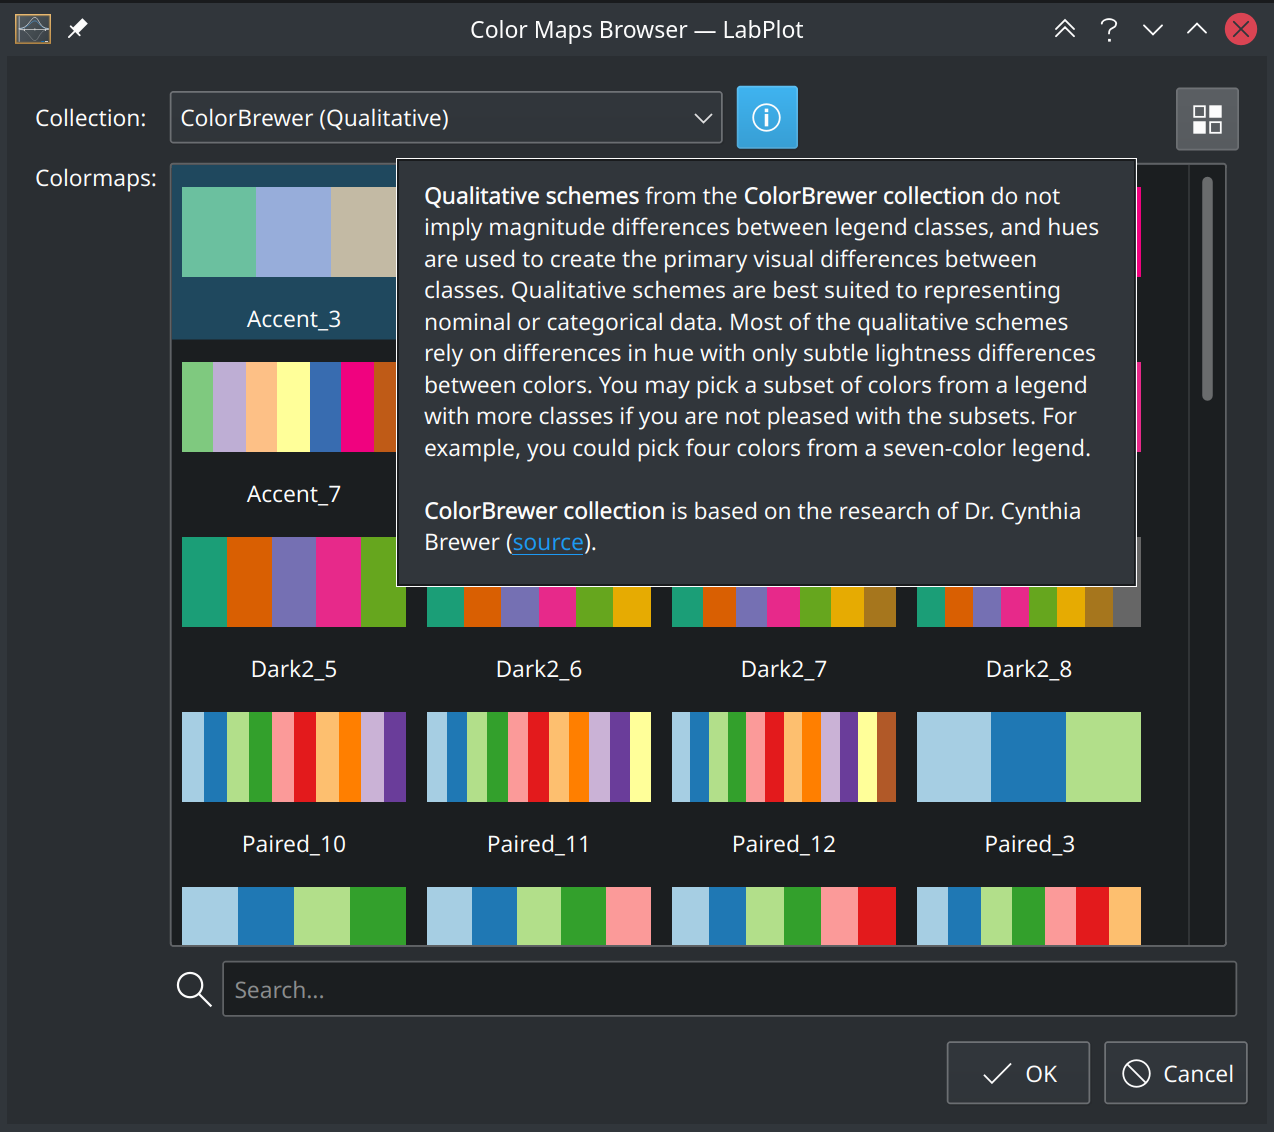 Information in the Color Maps Browser